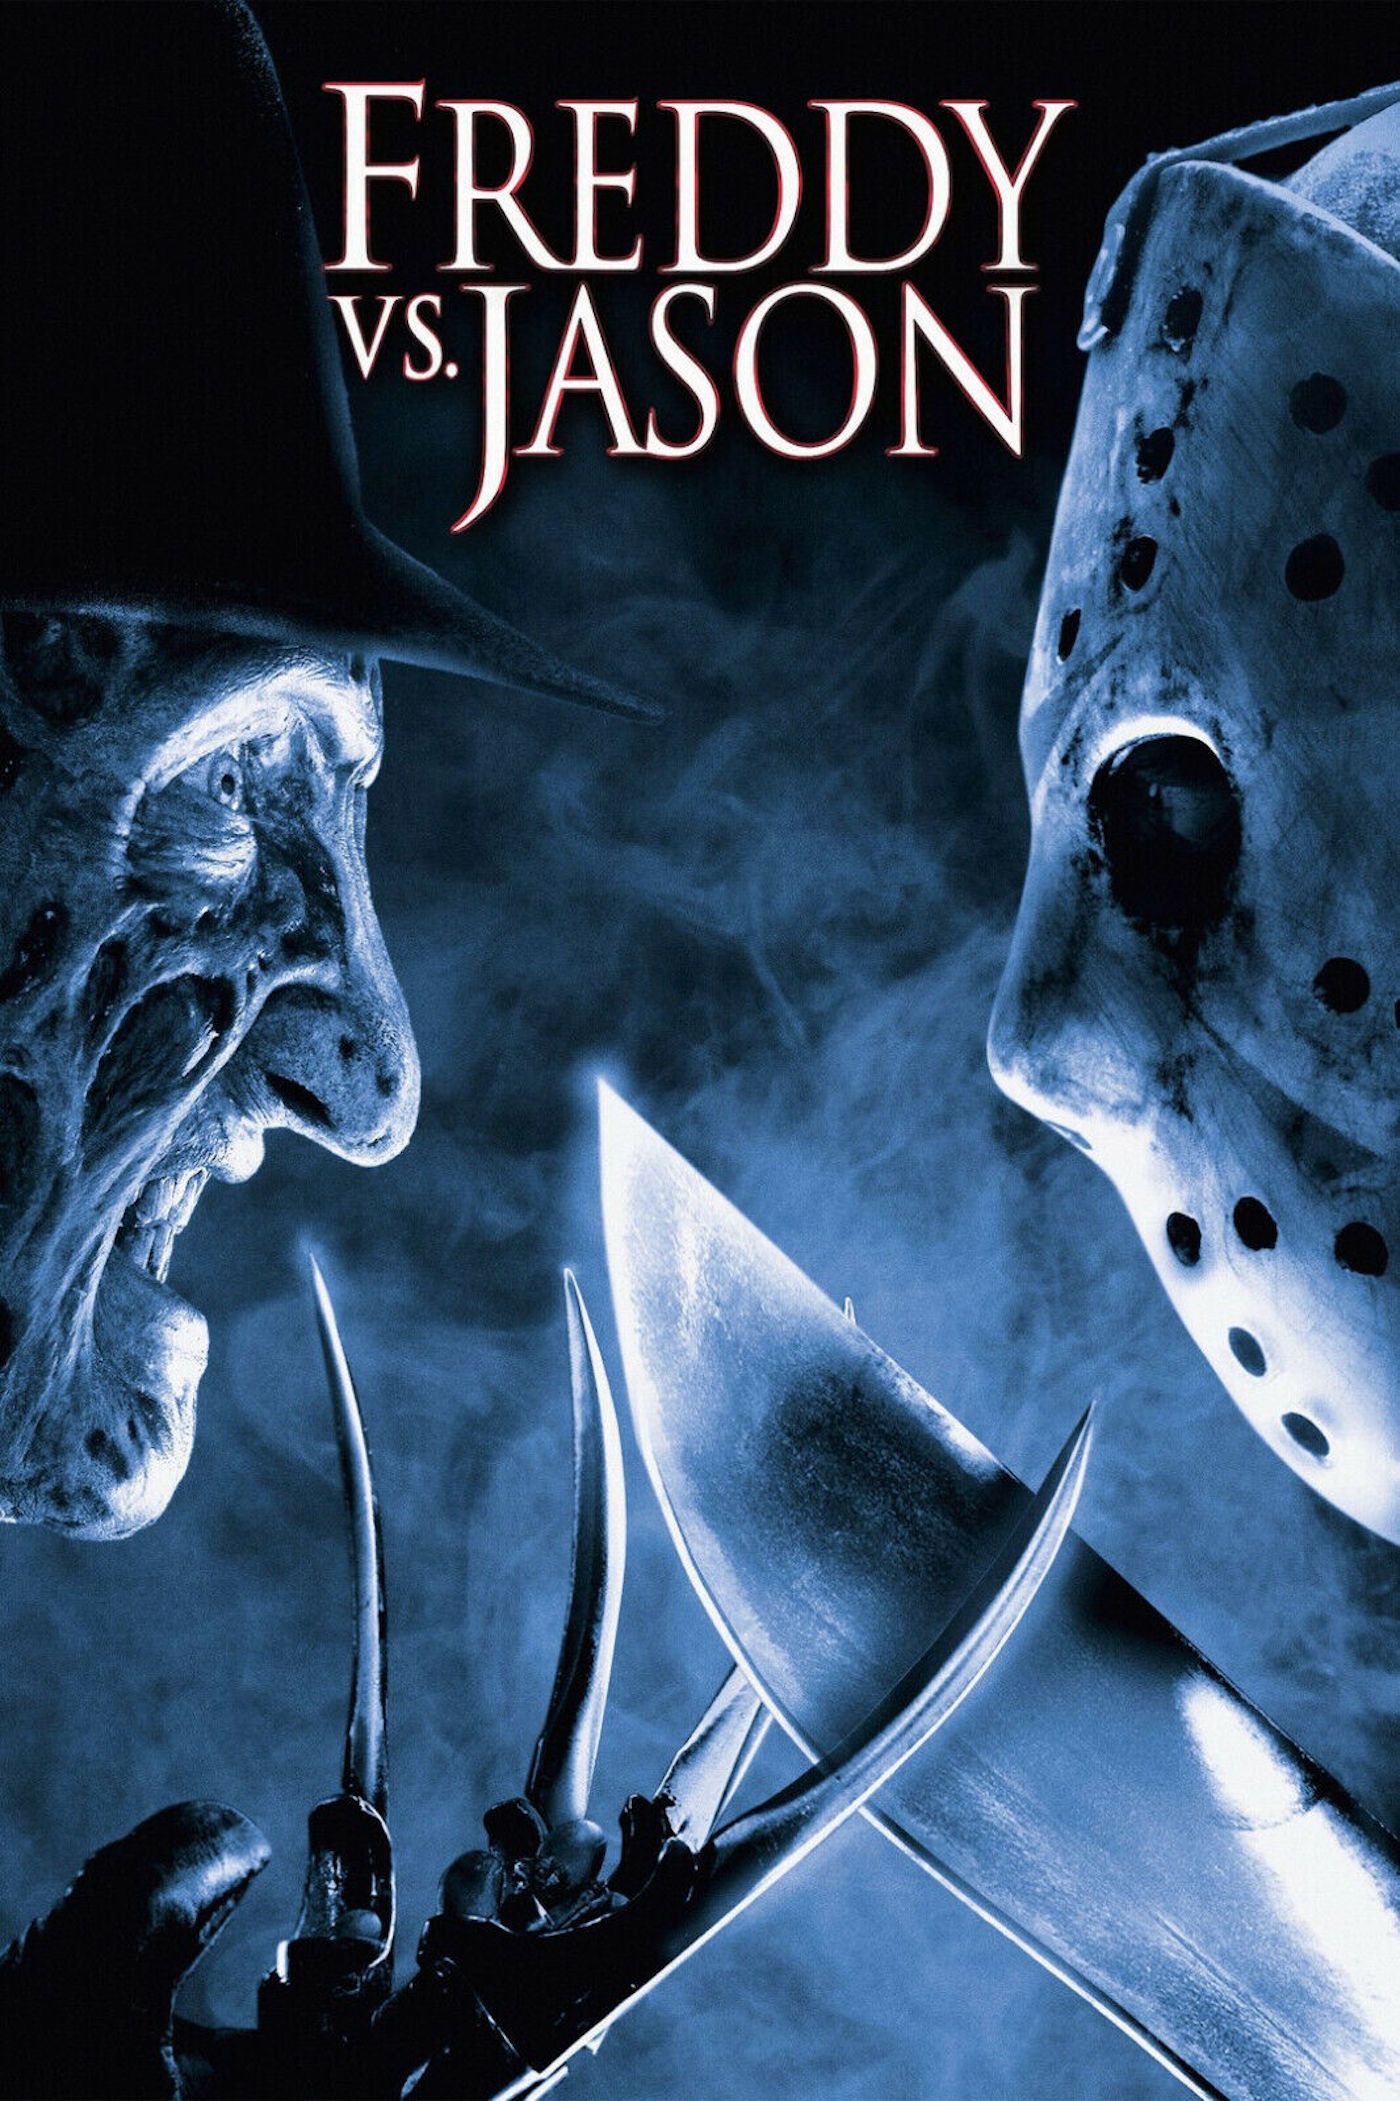 What Happened To The Horror Crossover Movie With Freddy Jason And Ash